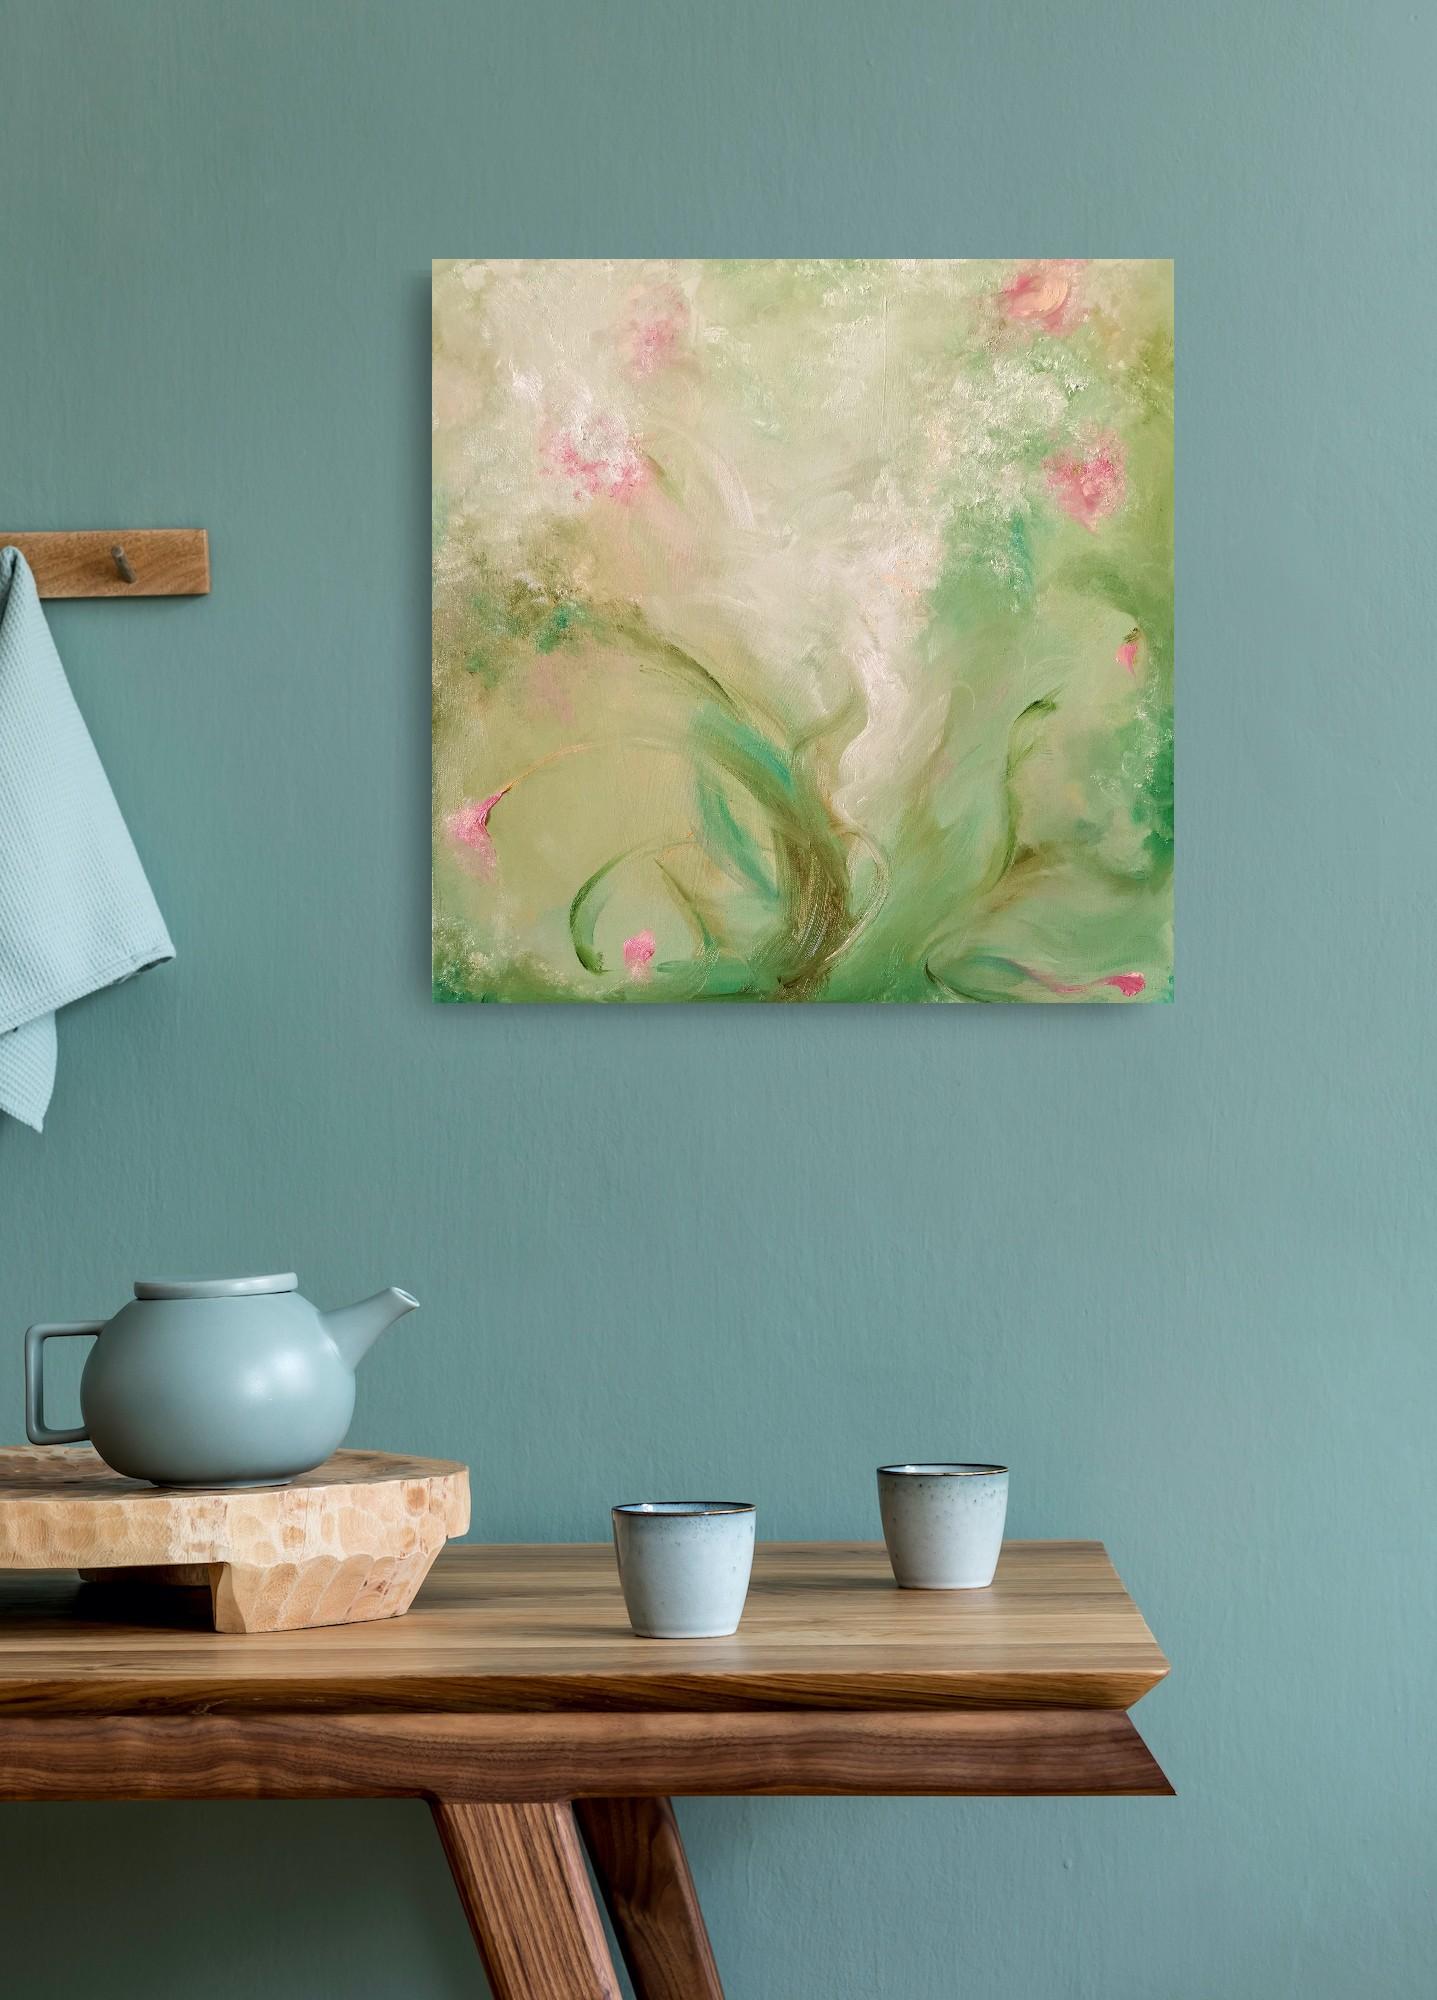 A most verdant spring - Whimsical green and pink abstract painting 8